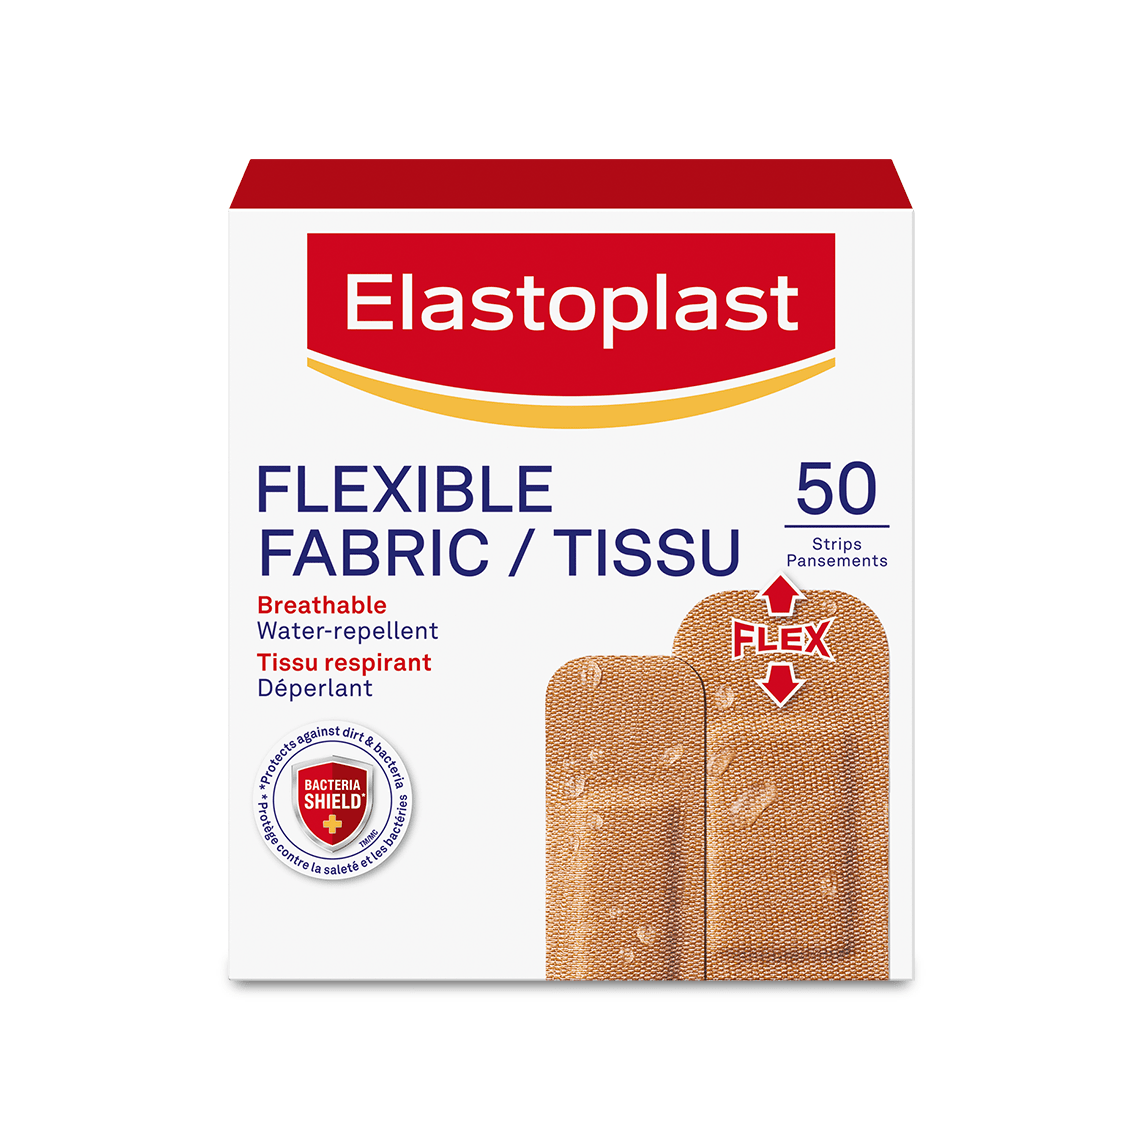 Elastoplast Flexible Fabric Bandages For Wound Protection